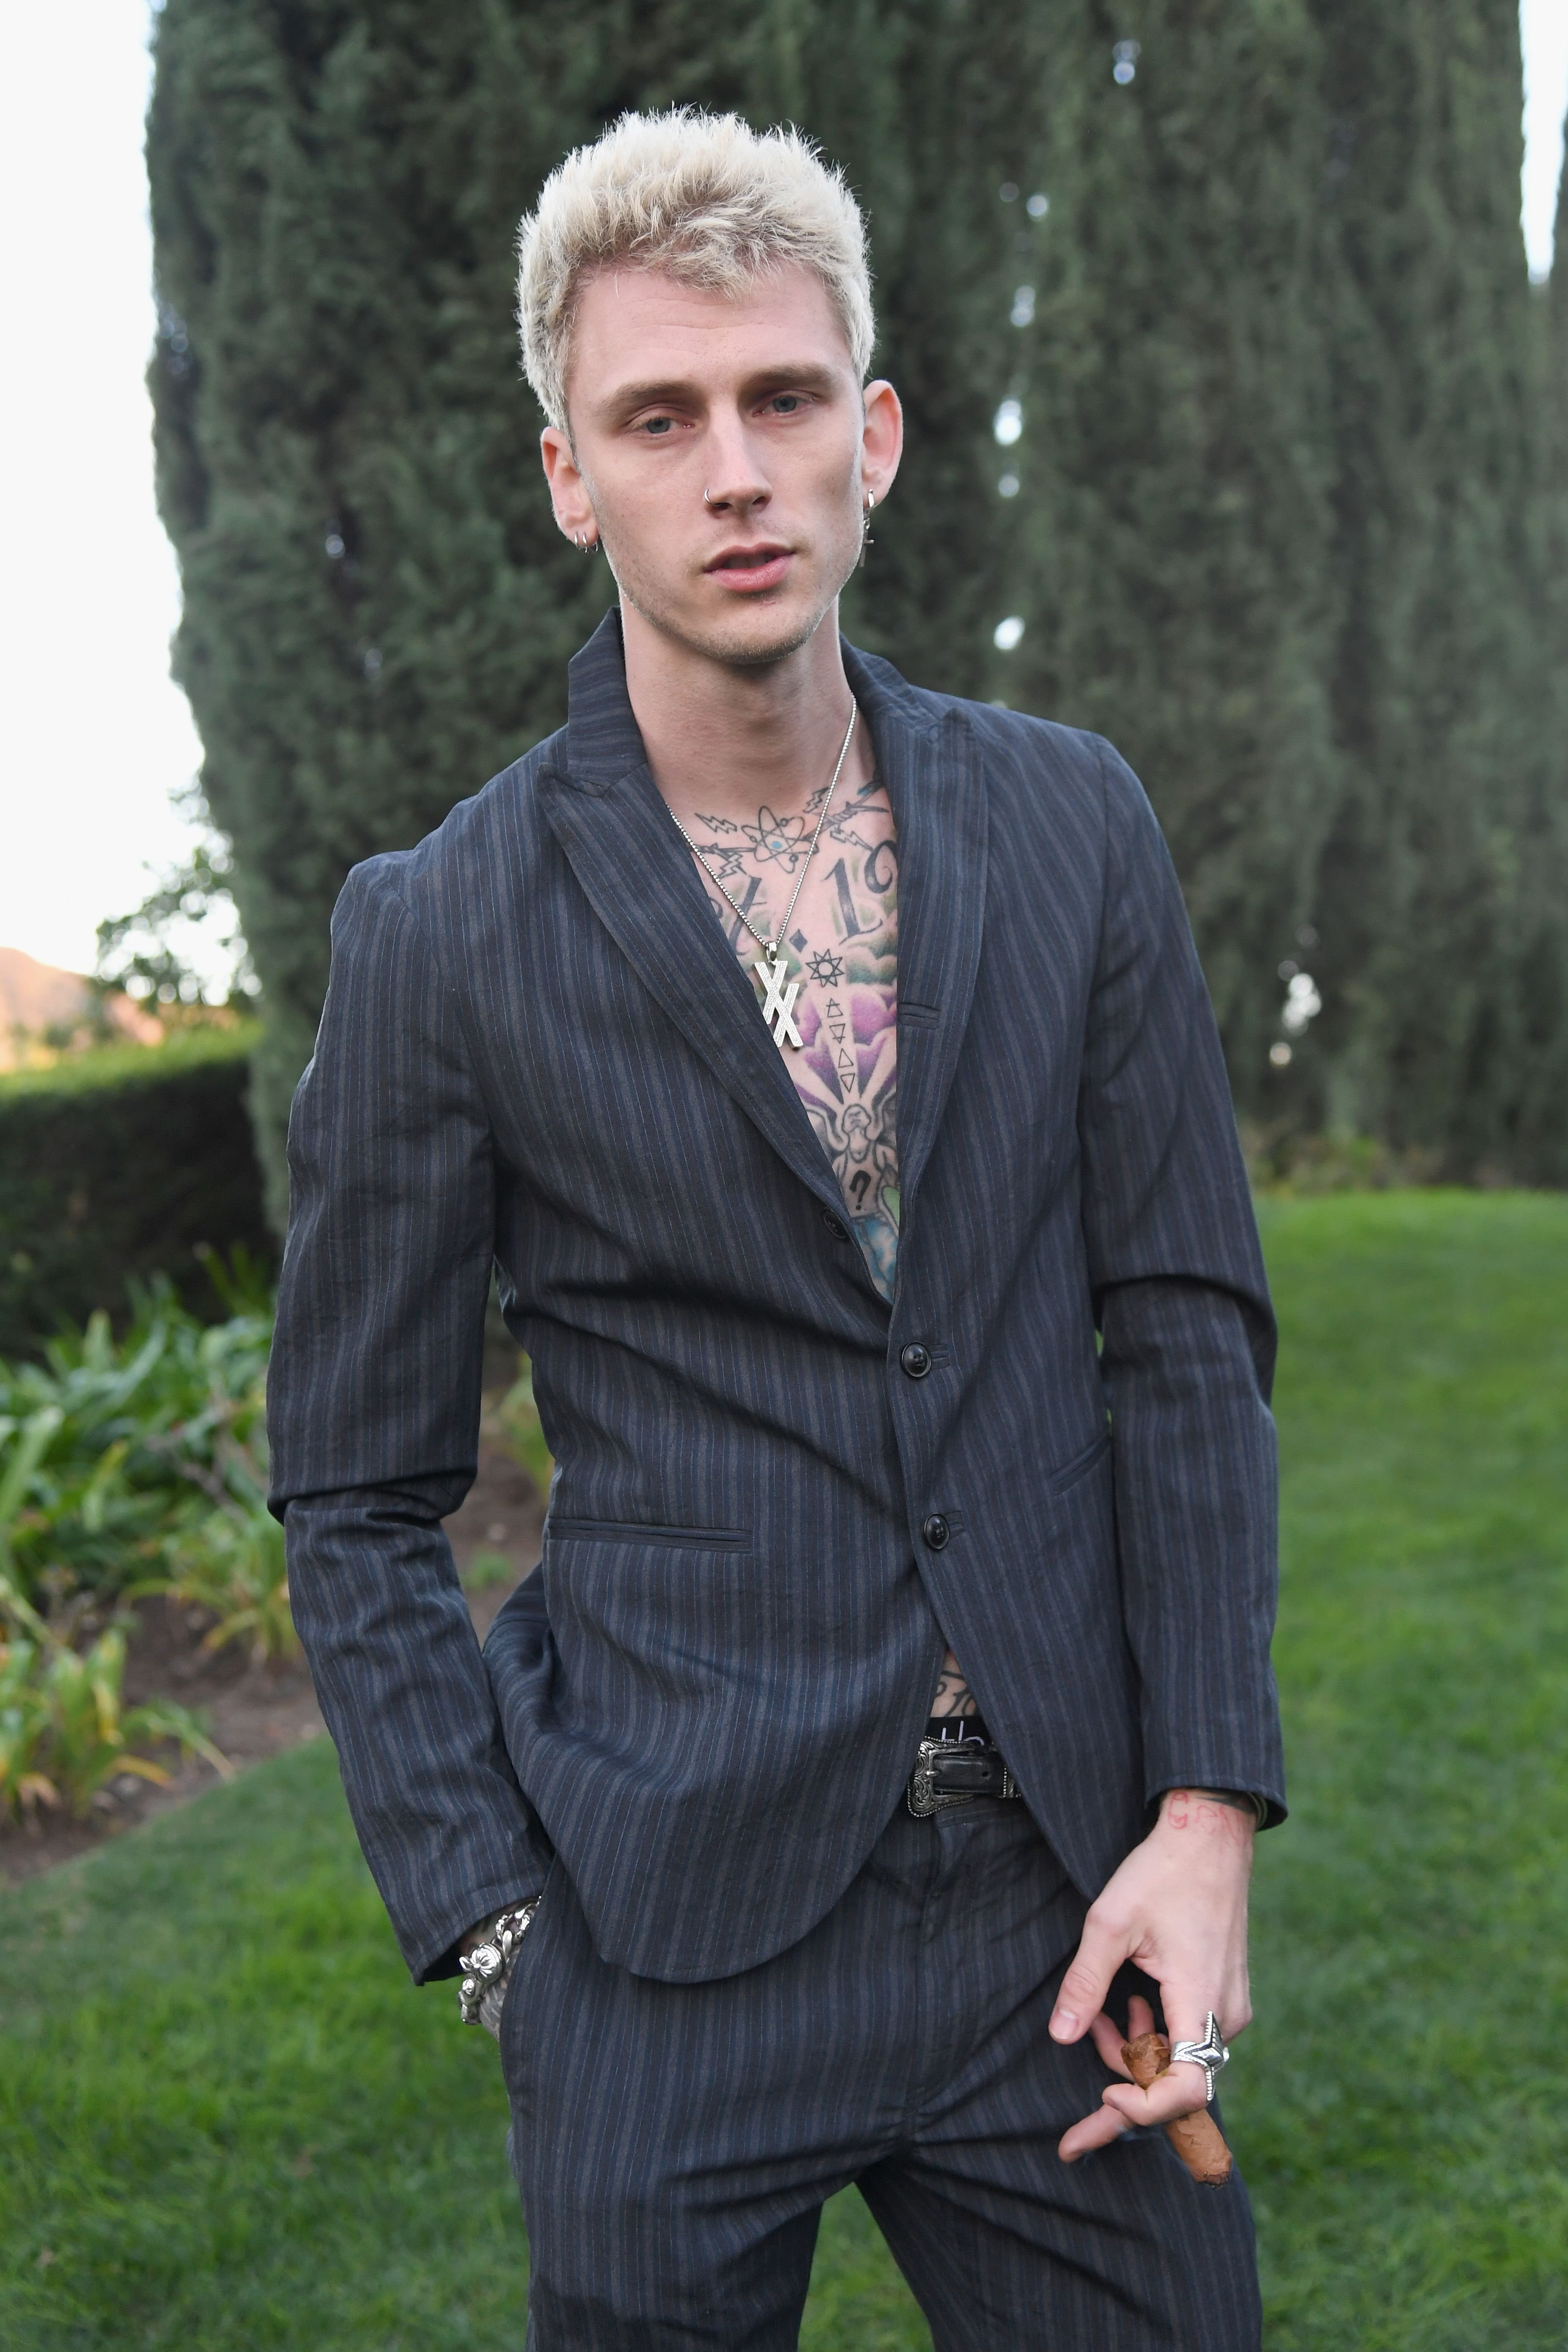 Machine Gun Kelly at the 2019 Roc Nation THE BRUNCH in February 2019 in Los Angeles | Source: Getty Images, 